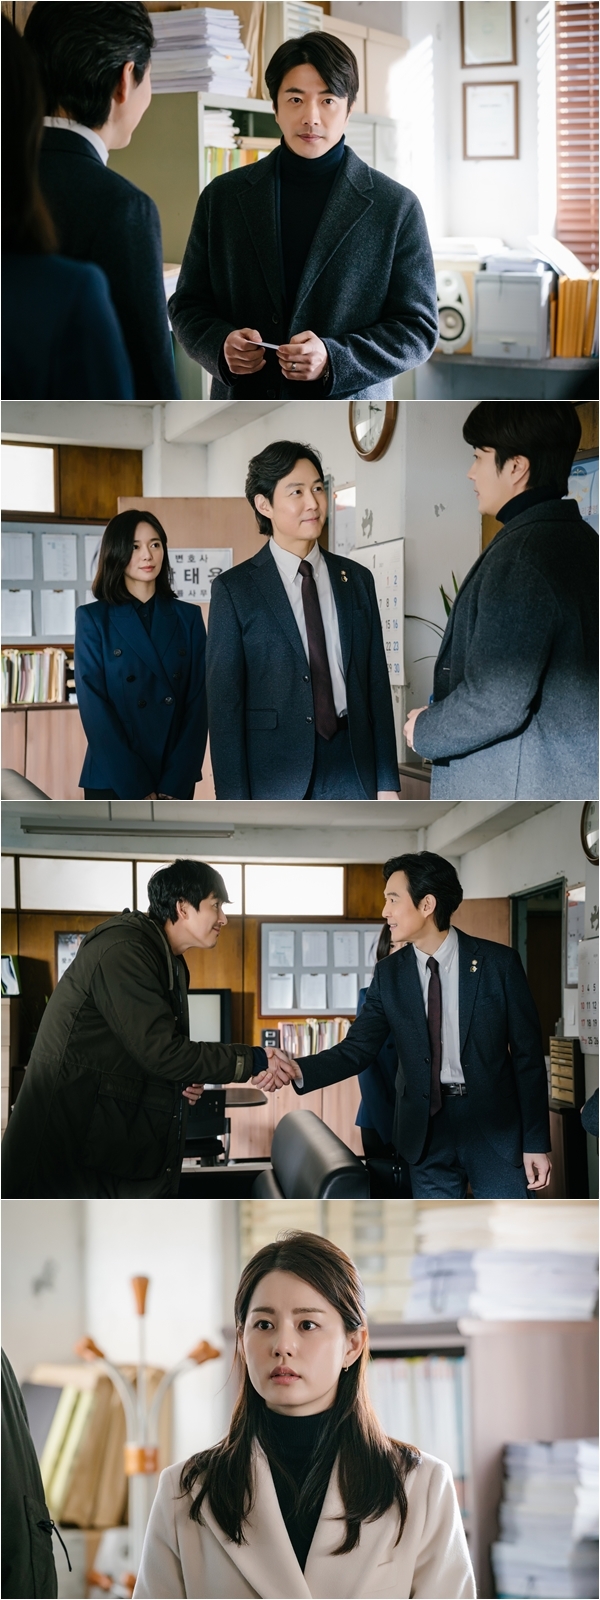 On the 20th, the Flying Going Forward revealed the appearance of lawmakers Jang Tae-joon (Lee Jung-jae) and Aide Yoon Hye-won (Lee Elijah), who visited Park Tae-yong (Kwon Sang-woo), Park Sam-soo (Jung Woo-sung), and Yoo Kyoung (Kim Joo-hyun).Lee Jung-jae and Lee Elijahs special appearance was concluded with the relationship with director Kwak Jung-hwan. The main characters who were greatly loved by JTBC Drama Aide series were reunited.The appearance of Jang Tae-joon and Aide Yoon Hye-won, who are going straight to change the world, will bring turning points to Park Tae-yong, Park Sam-soo, and the reverse play of justice, said the production team of Fly, adding, I hope Lee Jung-jae and Lee Elijah will be able to show a short but powerful room wearing Jang Tae-joon and Yoon Hye-wons clothes again.Fly and Go to Chun Yong leaves only two times to the end, and Park Tae Yong, Park Sam Soo, and Yo Kyoung have started to track down the reality of Kim Hyung Chun (Kim Kap-soo), who coordinates elite groups.Those who persistently dug in succeeded in securing documents to reveal the trial transactions of Cho Gi-su (Cho Seong-ha) and Kim Hyung-chun, but they were in conflict over the method of investigation.Park Tae-yong, who felt the limit, delivered the document to Jang Yoon-seok (Jung Woong-in) to get help from the prosecution, and Park Sam-soo was angry.With the conflict reaching its peak ahead of the confrontation with the elite group, the confrontation between the two predicted an unpredictable development.Fly and Go to the Stream is broadcast every Friday and Saturday at 10 pm.